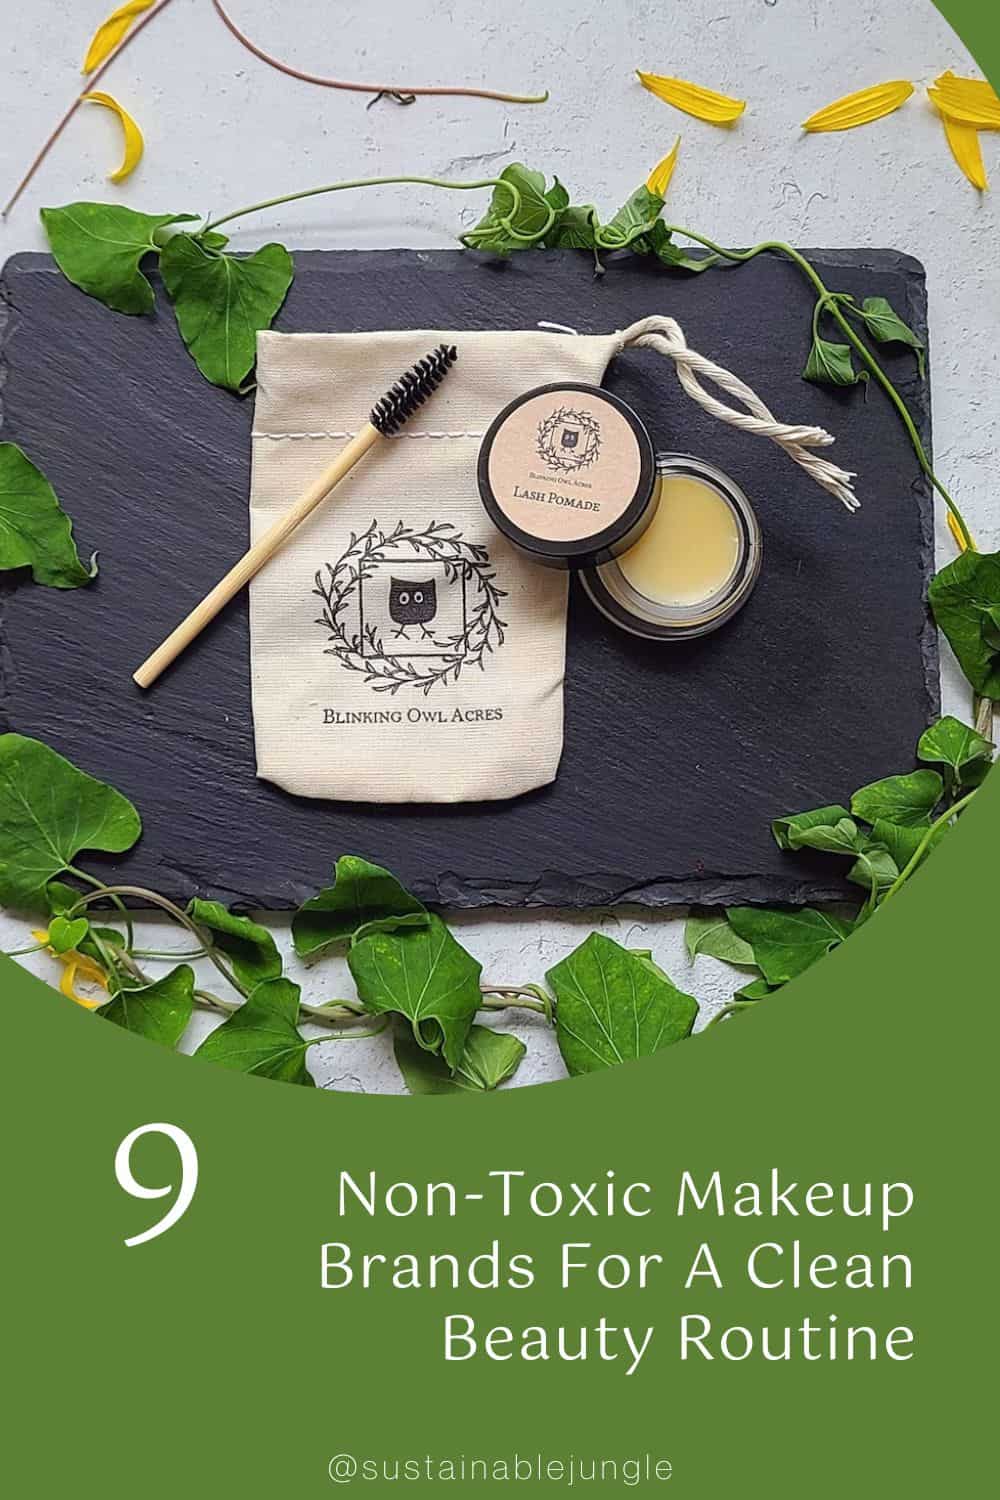 9 Non-Toxic Makeup Brands For A Clean Beauty Routine Image by Blinking Owl Acres #nontoxicmakeup #nontoxiccosmetics #nontoxicmakeupbrands #cleanmakeupbrands #bestnontoxicmakeup #cleanestmakeupbrands #sustainablejungle